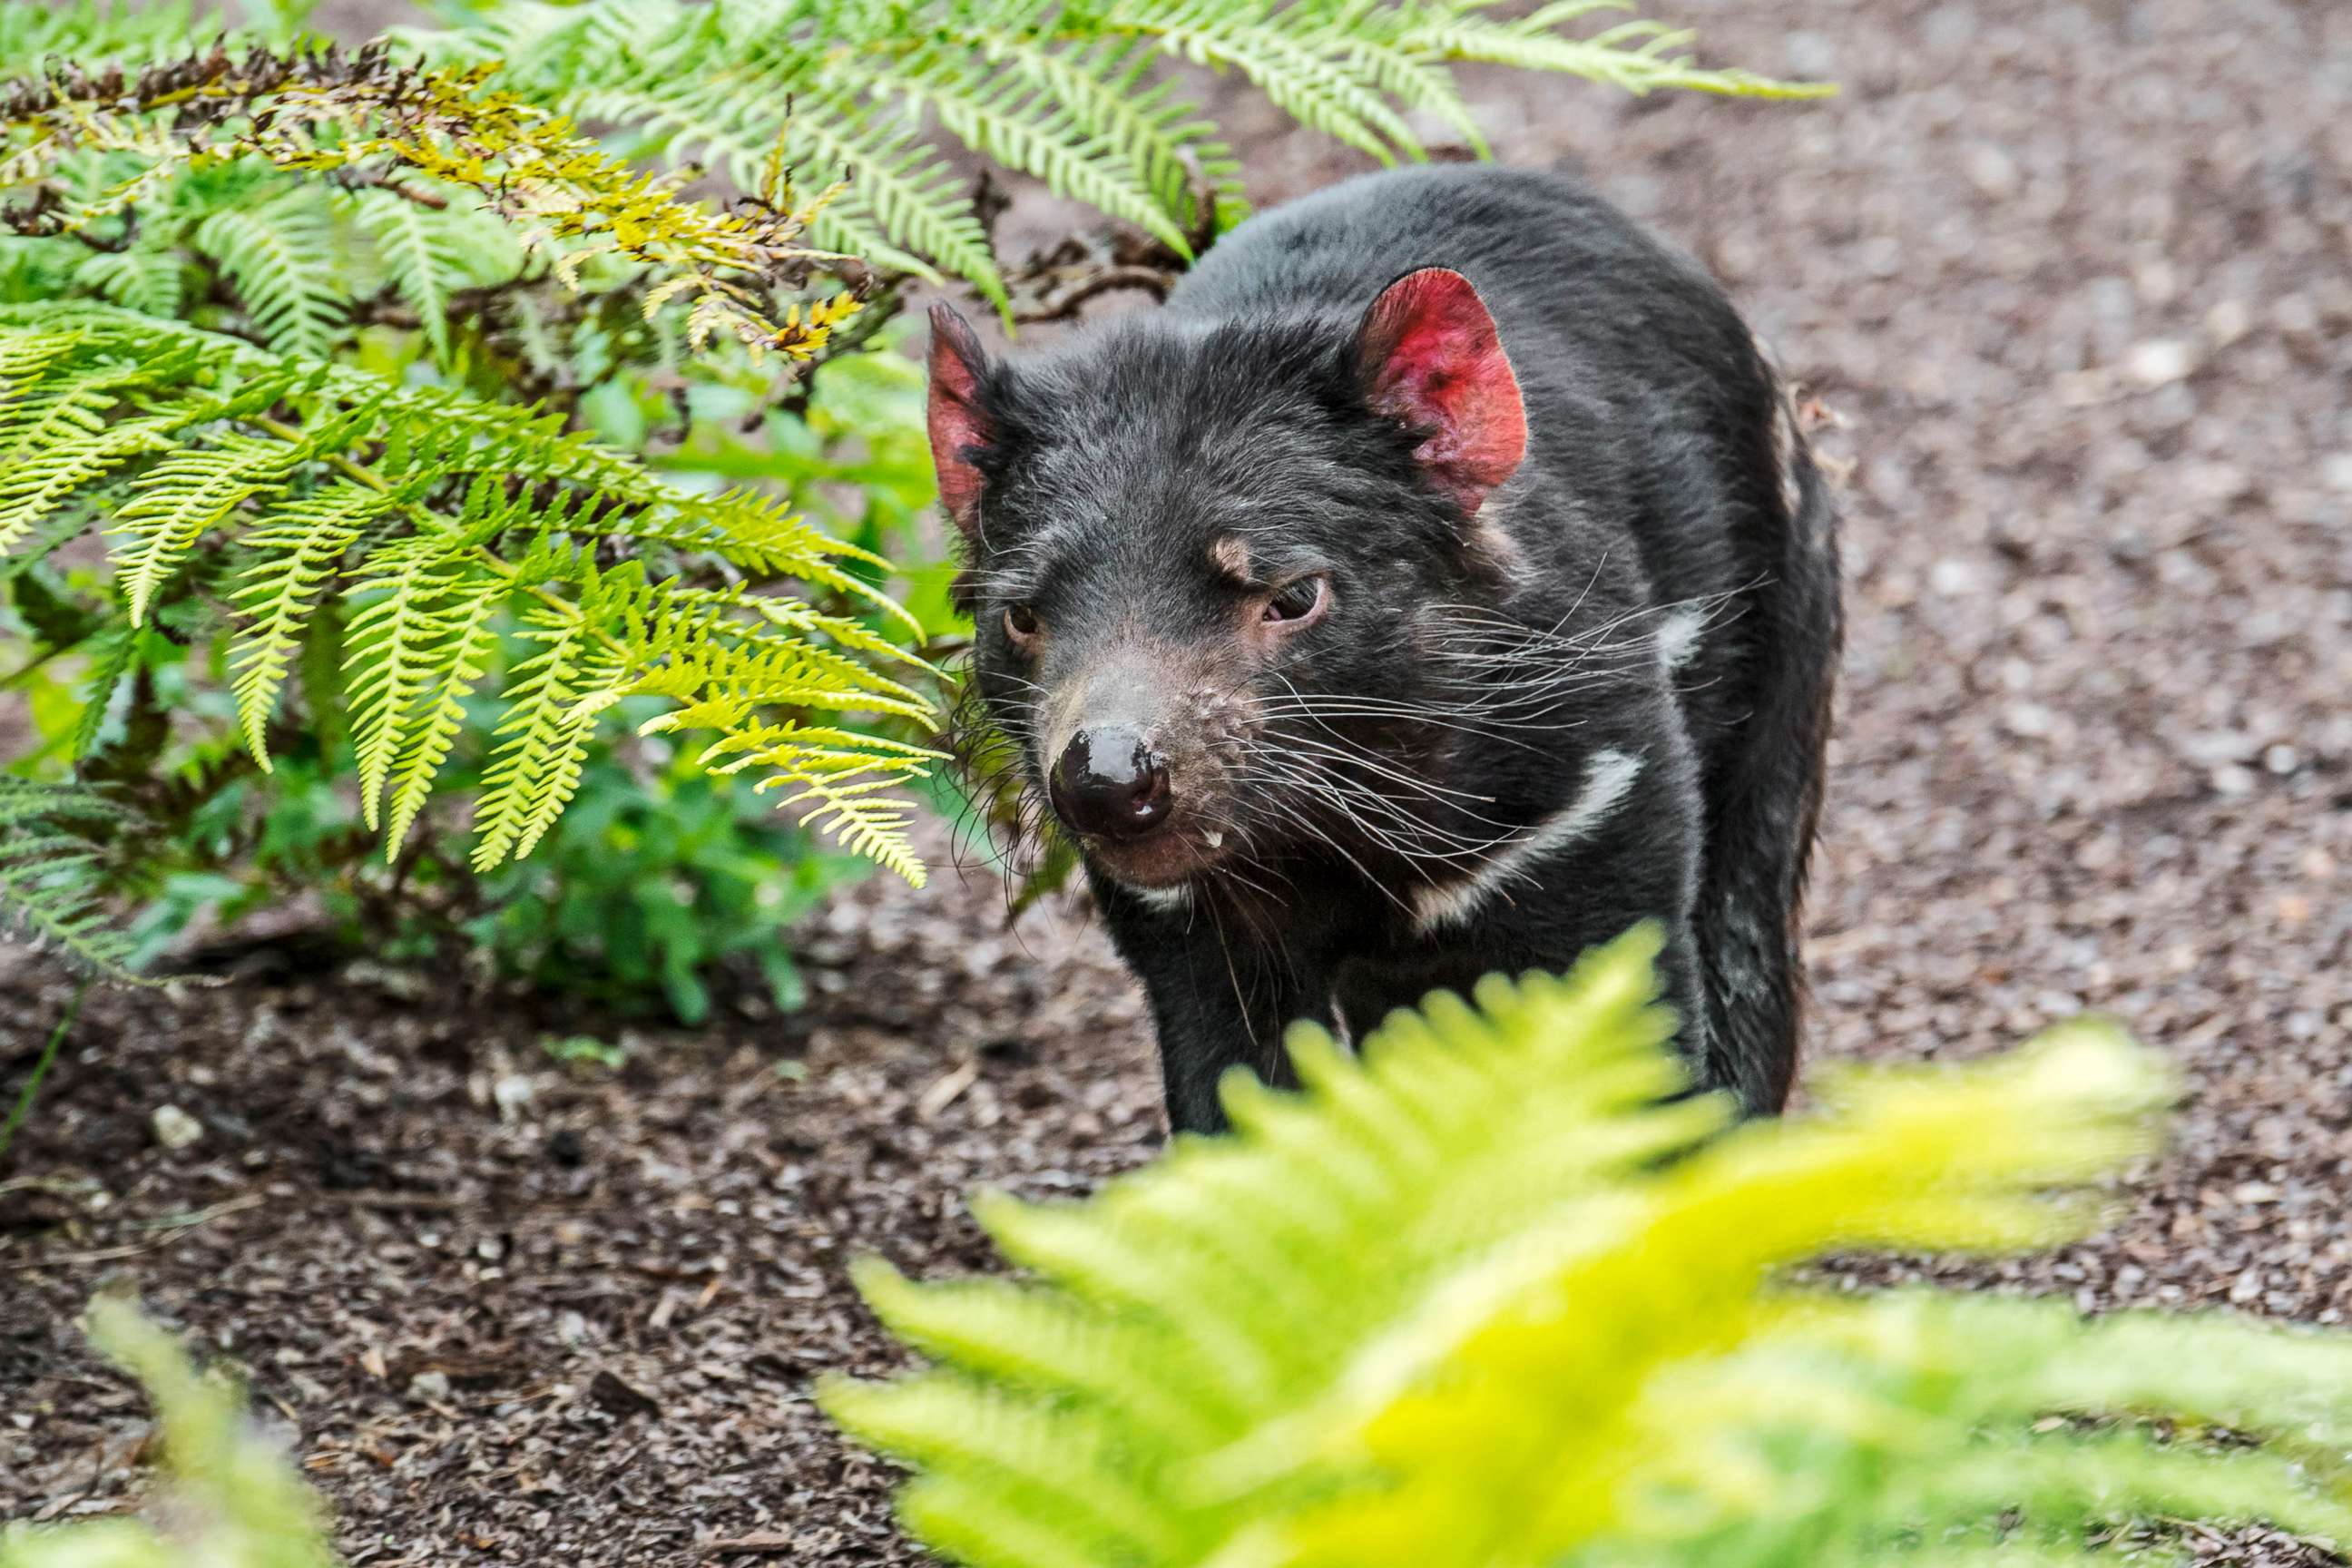 PHOTO: A Tasmanian devil stands in a wooded area in an undated photo.